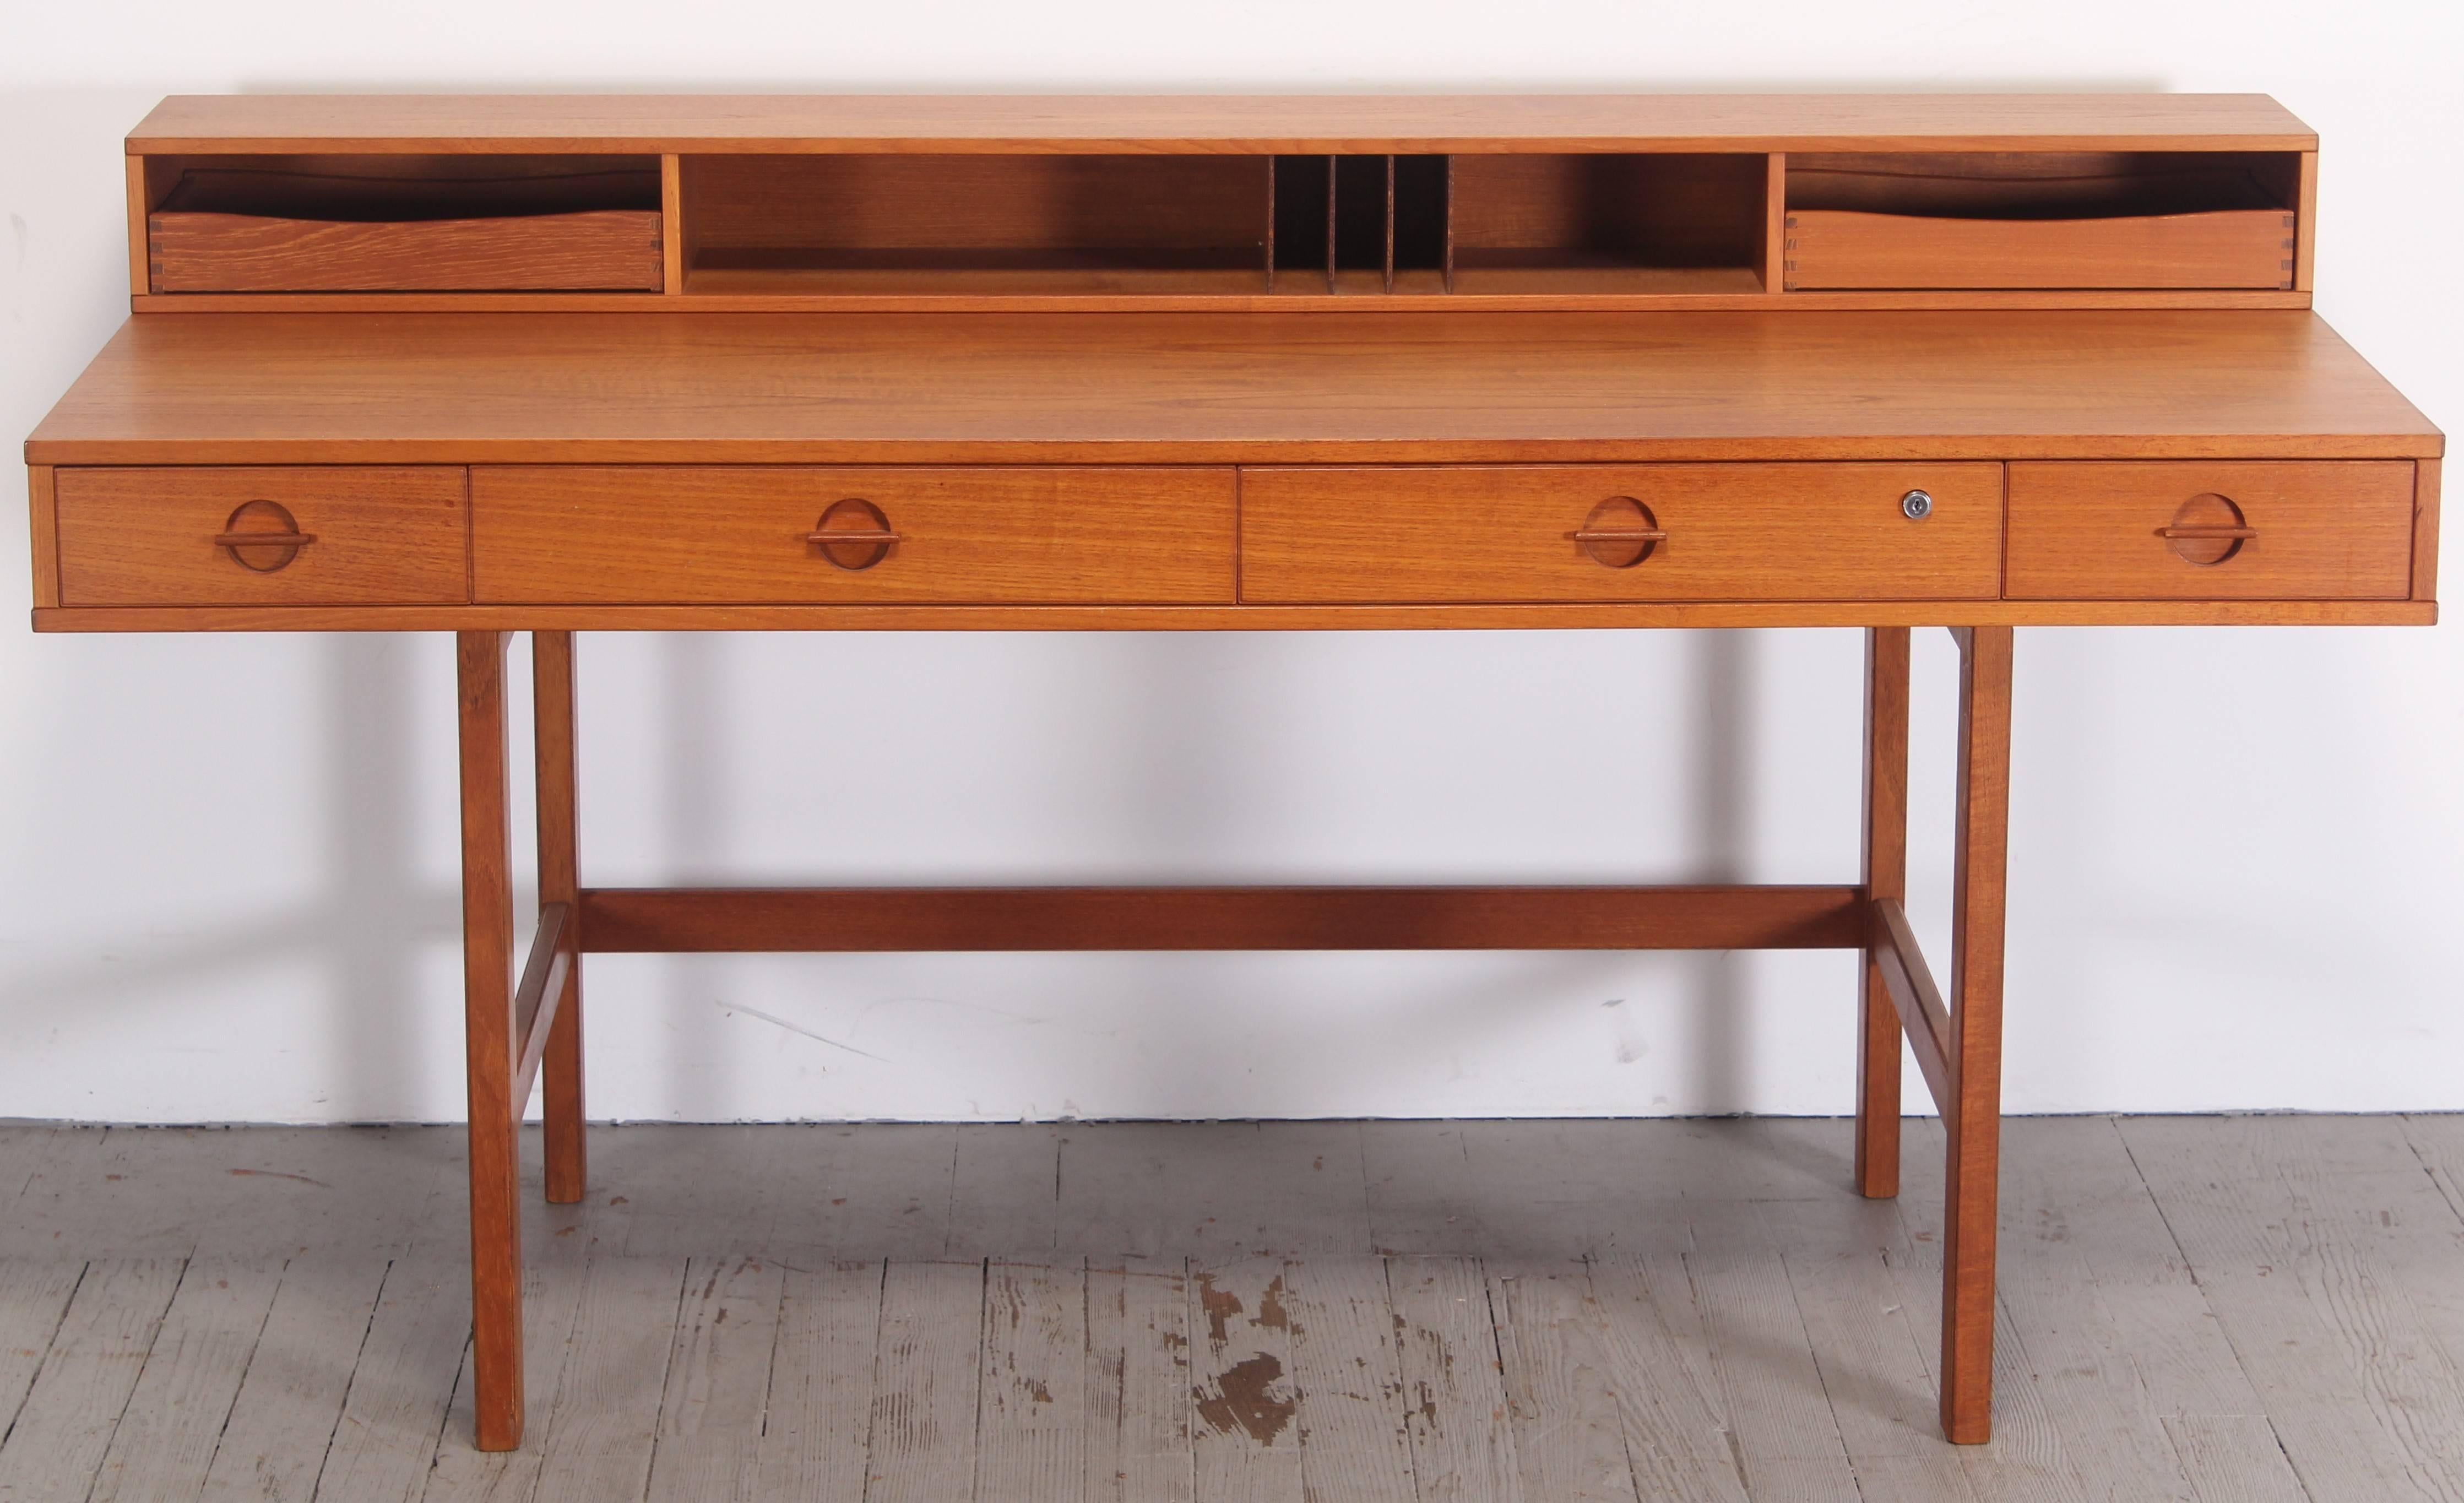 Designed by Peter Lovig-Nielsen, sometimes attributed to Jens Quistgaard. Excellent teak wood desk with four drawers, no key for lock, drawer is currently unlocked. Height of flip top up is 34", depth of desk is 38" when flip top is